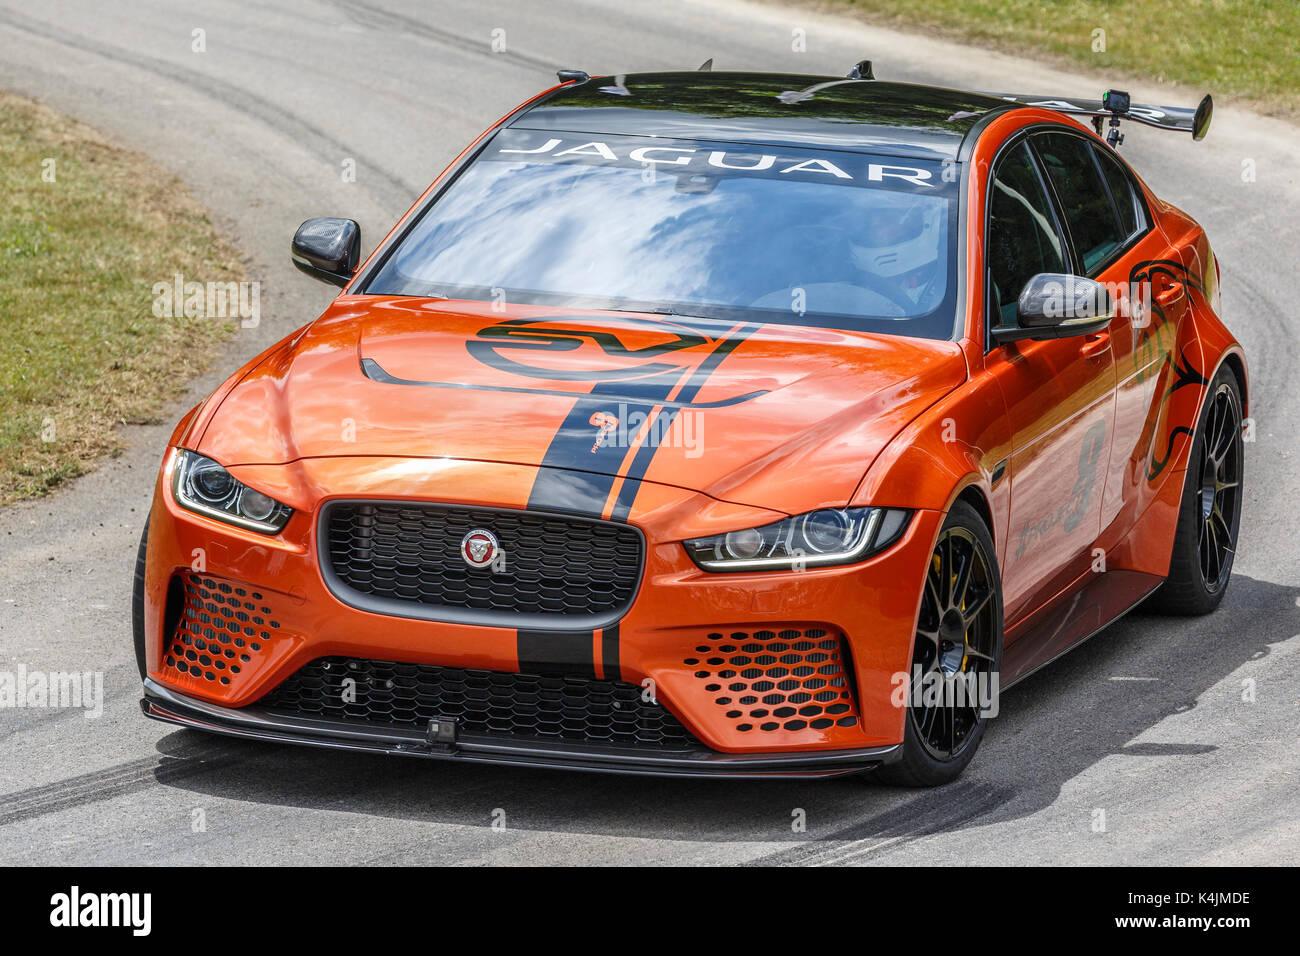 2017 Jaguar XE SVR Project 8 at the 2017 Goodwood Festival of Speed, Sussex, UK. Stock Photo